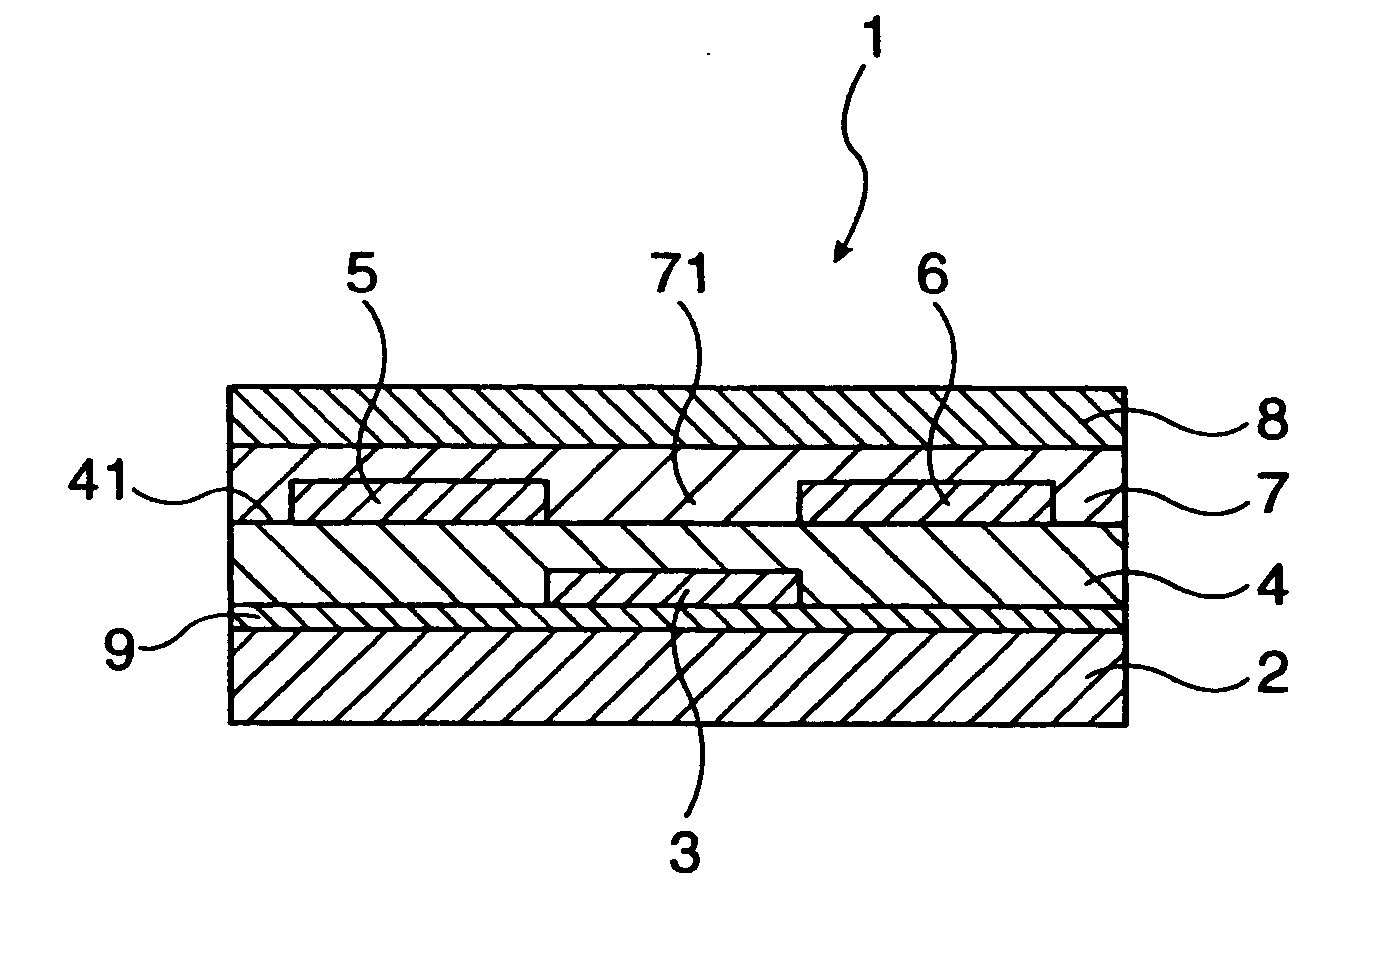 Thin-film transistor, method of producing thin-film transistor, electronic circuit, display, and electronic device